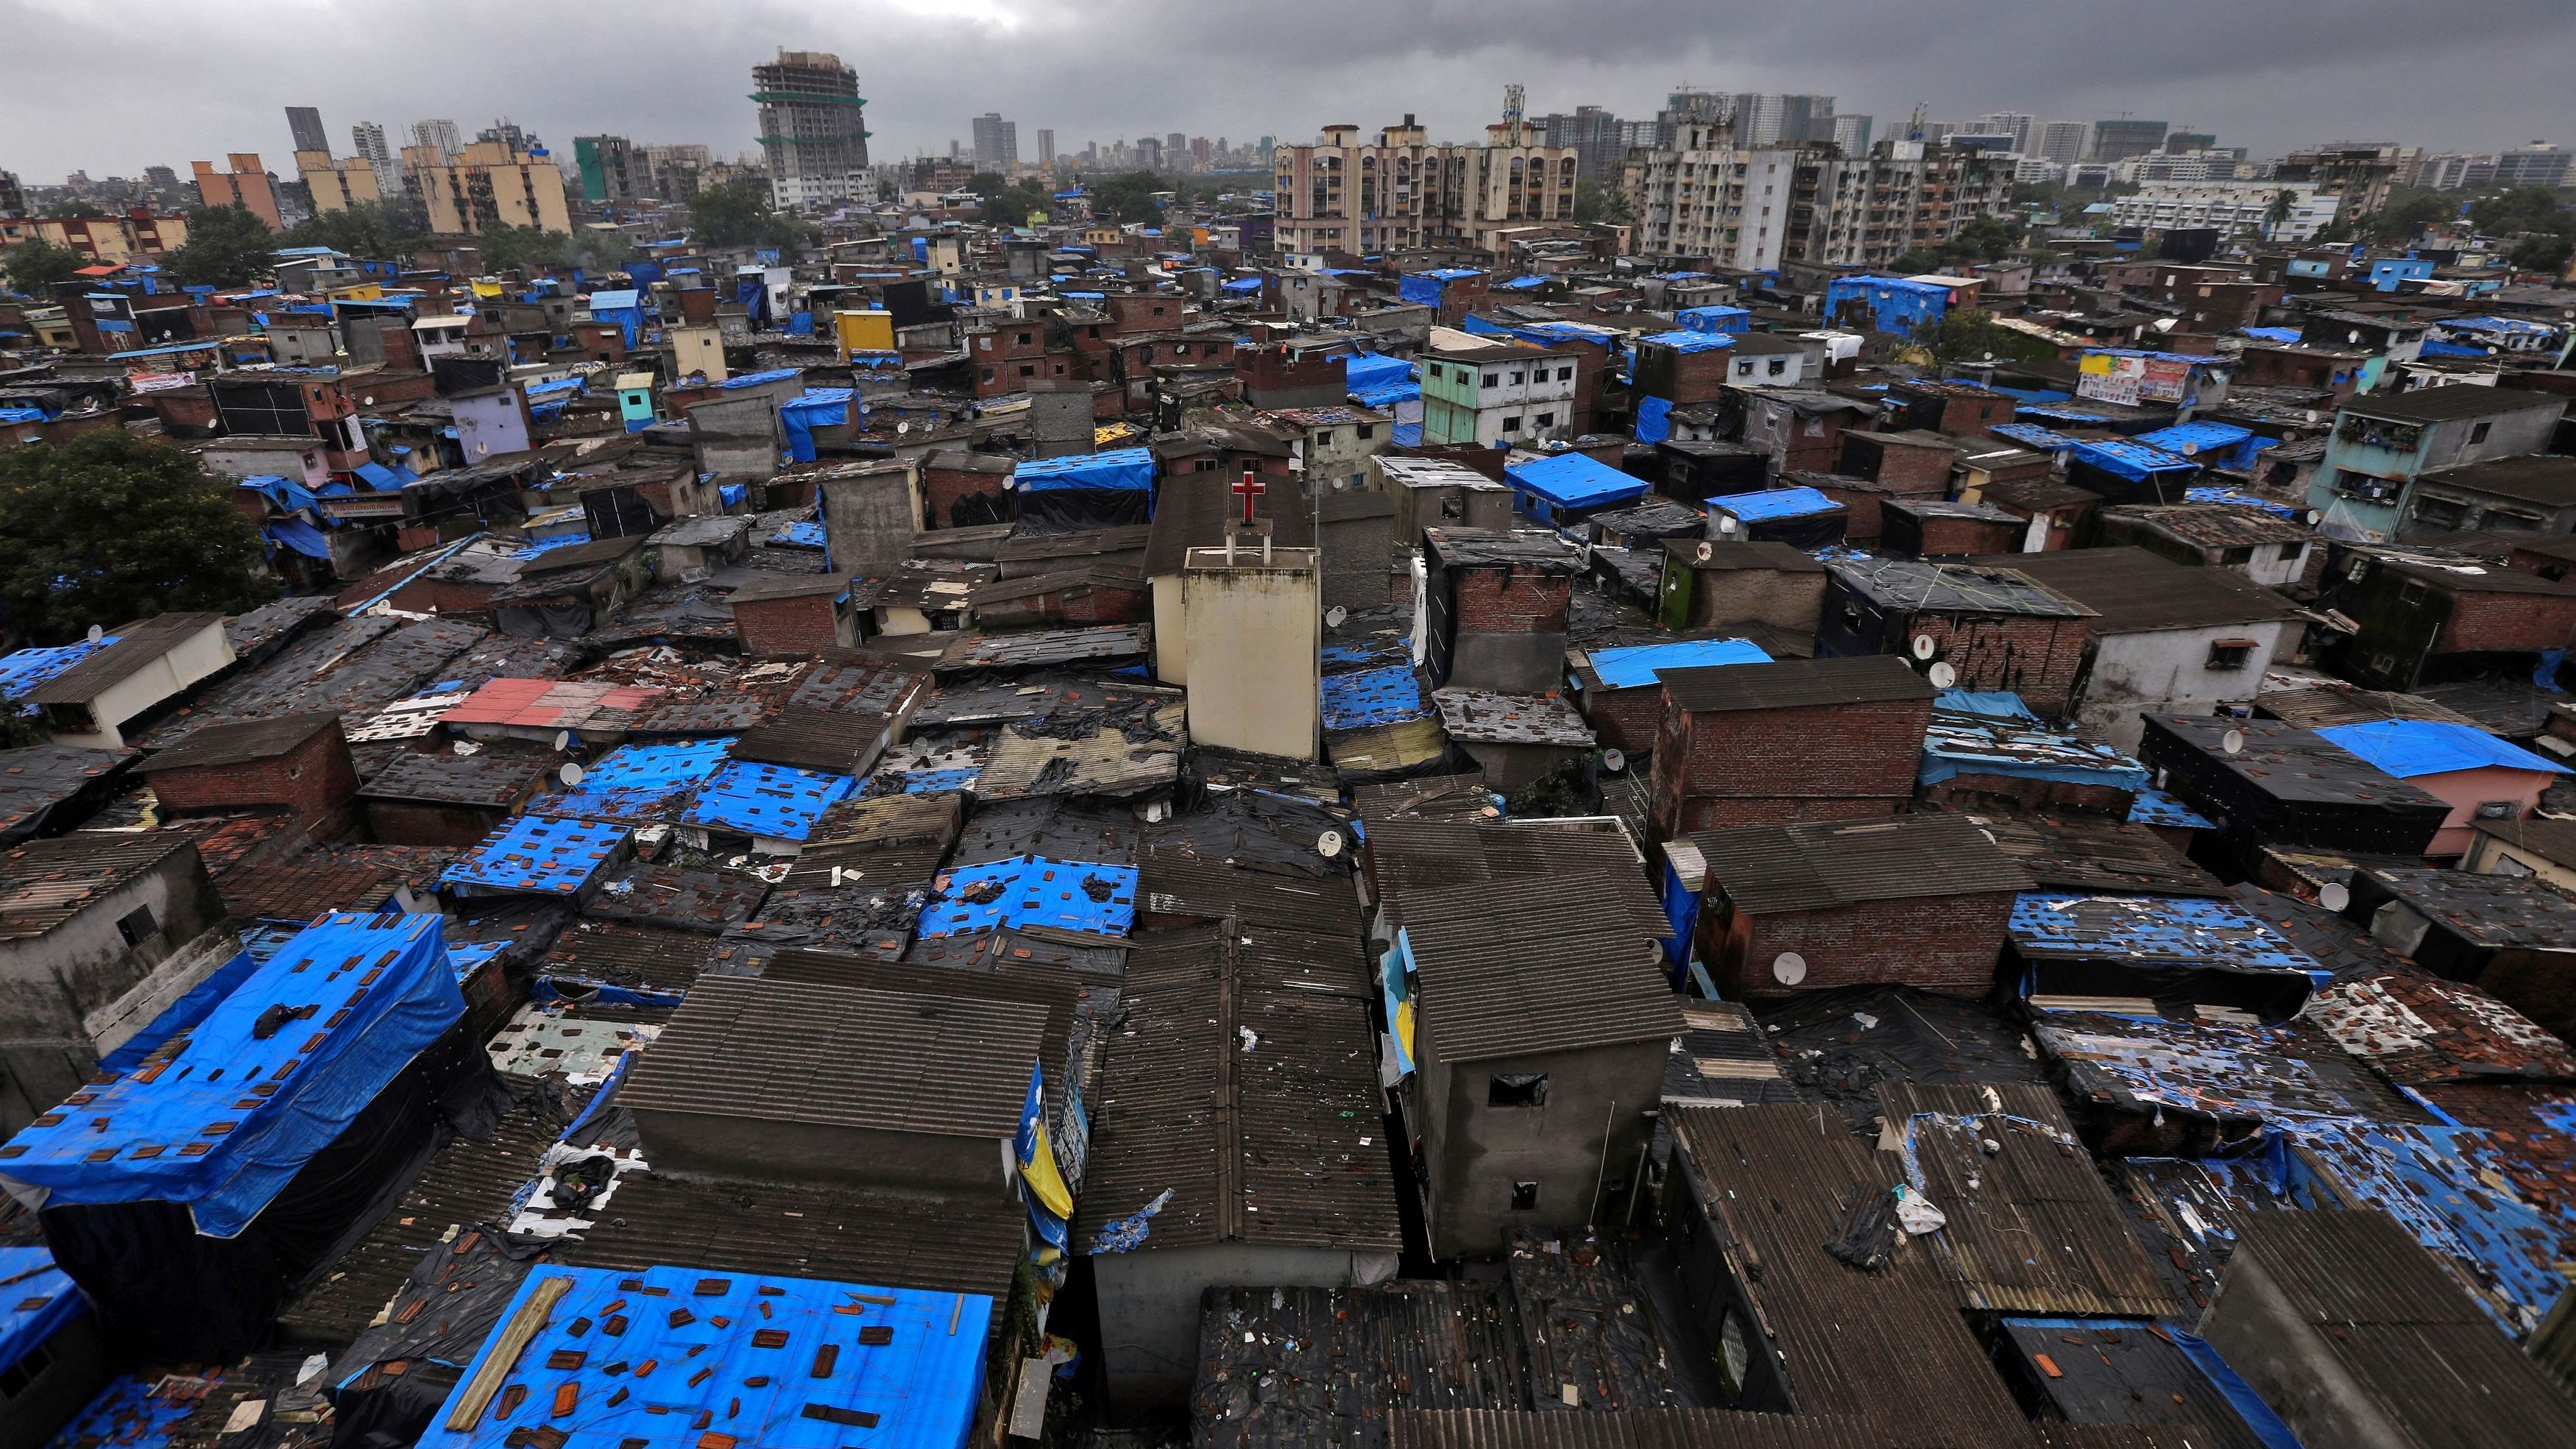 <div class="paragraphs"><p>A general view of Dharavi, one of Asia's largest slums, in Mumbai.&nbsp;</p></div>